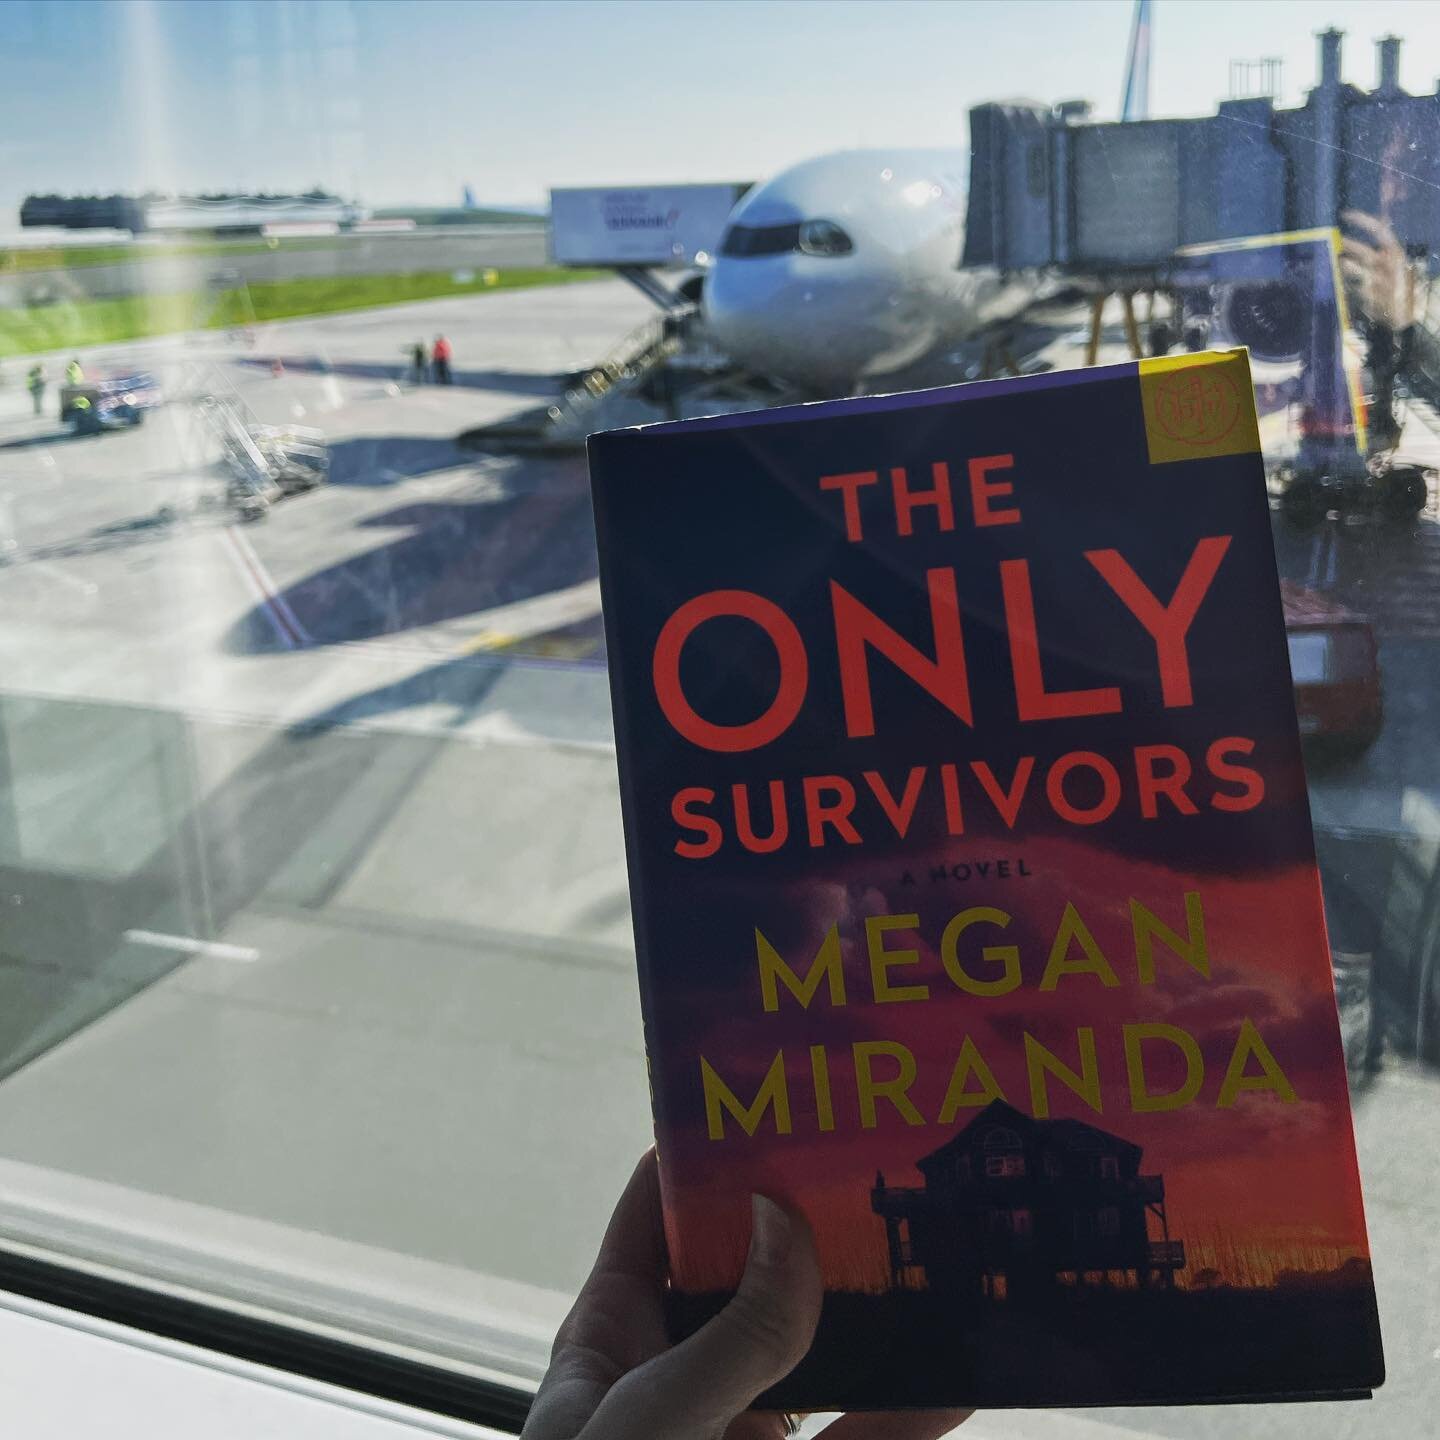 What a whirlwind story! 
I read this one during my flight to Italy, and it was more than entertaining enough to pass the time. I enjoyed the way this story was told: the present day chapters are presented first person from our main character&rsquo;s 